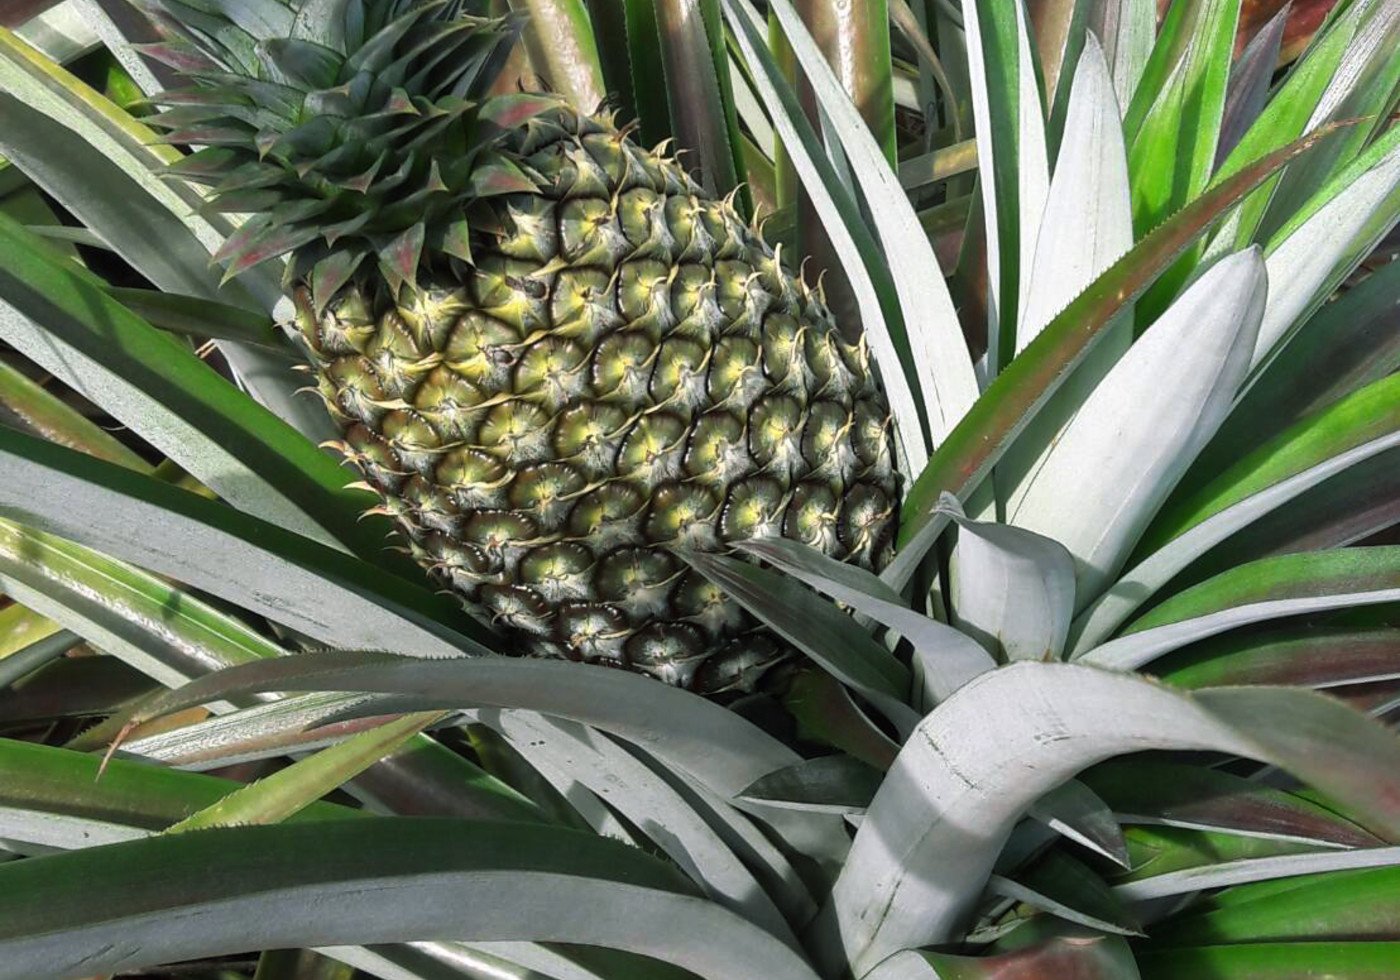 A pineapple in a plant.